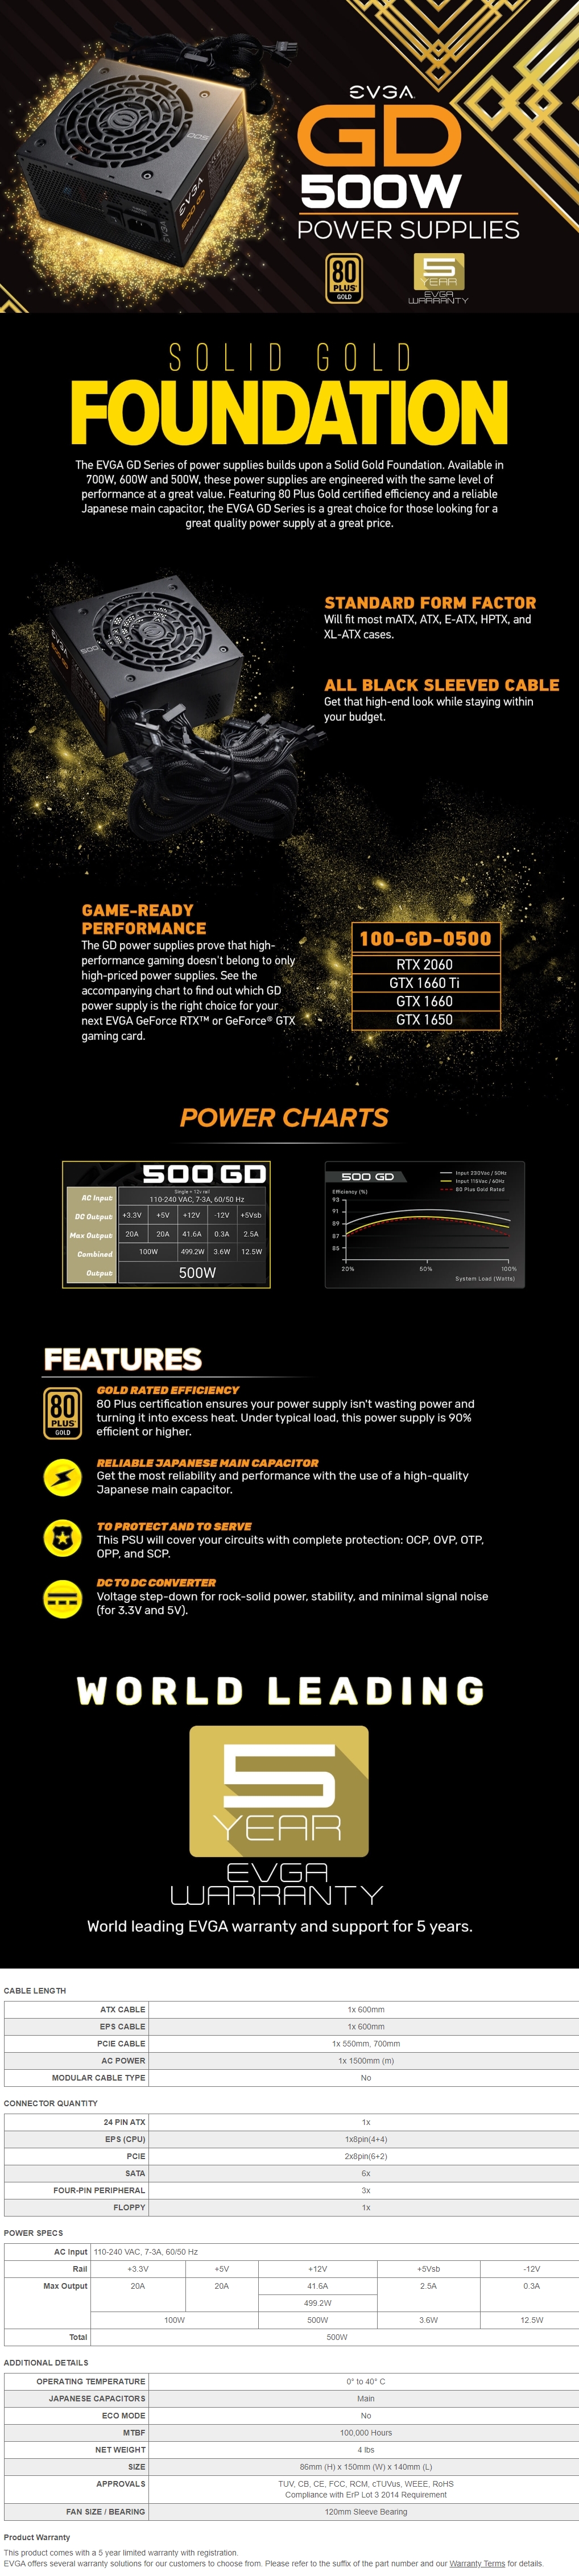 A large marketing image providing additional information about the product EVGA GD Series 500W 80PLUS Gold Power Supply - Additional alt info not provided